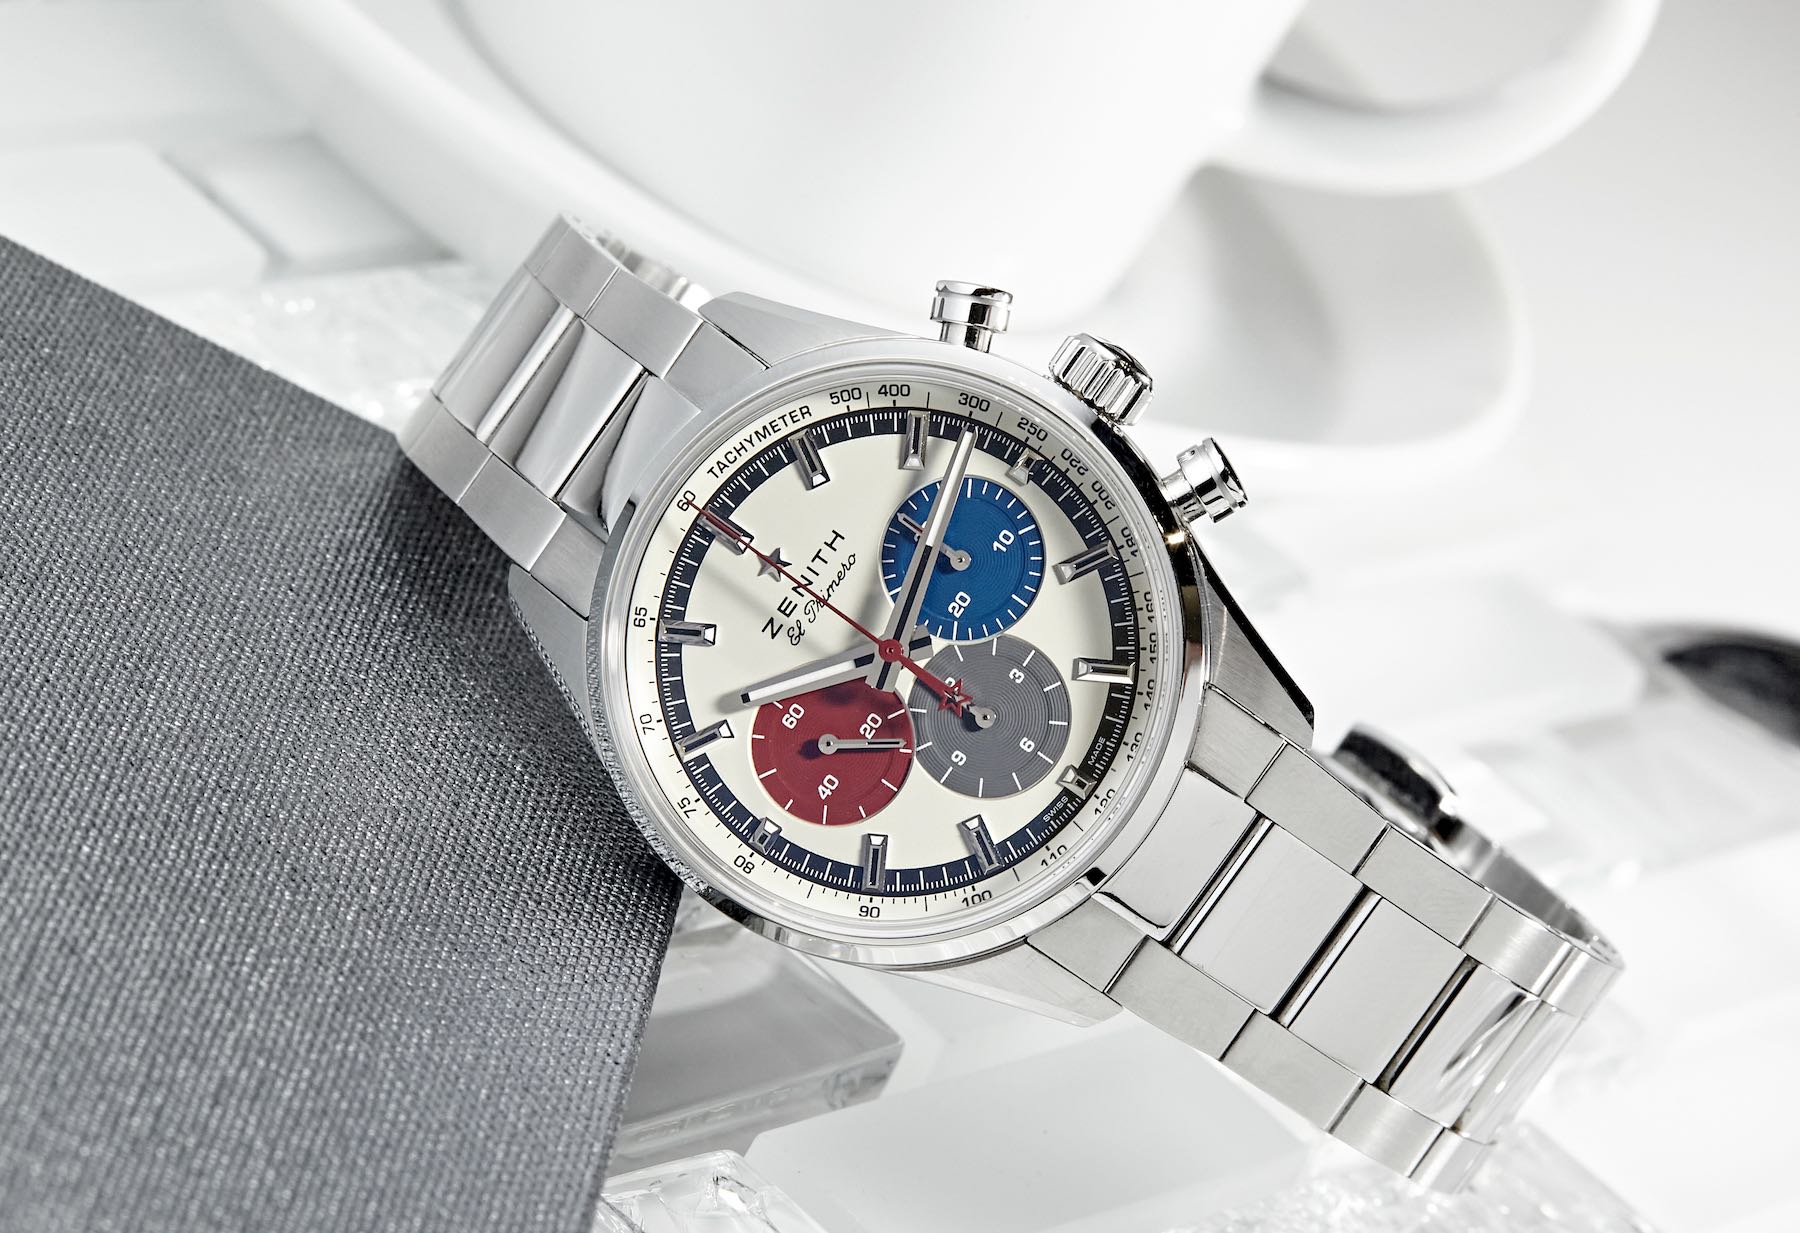 Hands-on and in-depth with the new Zenith Chronomaster El Primero